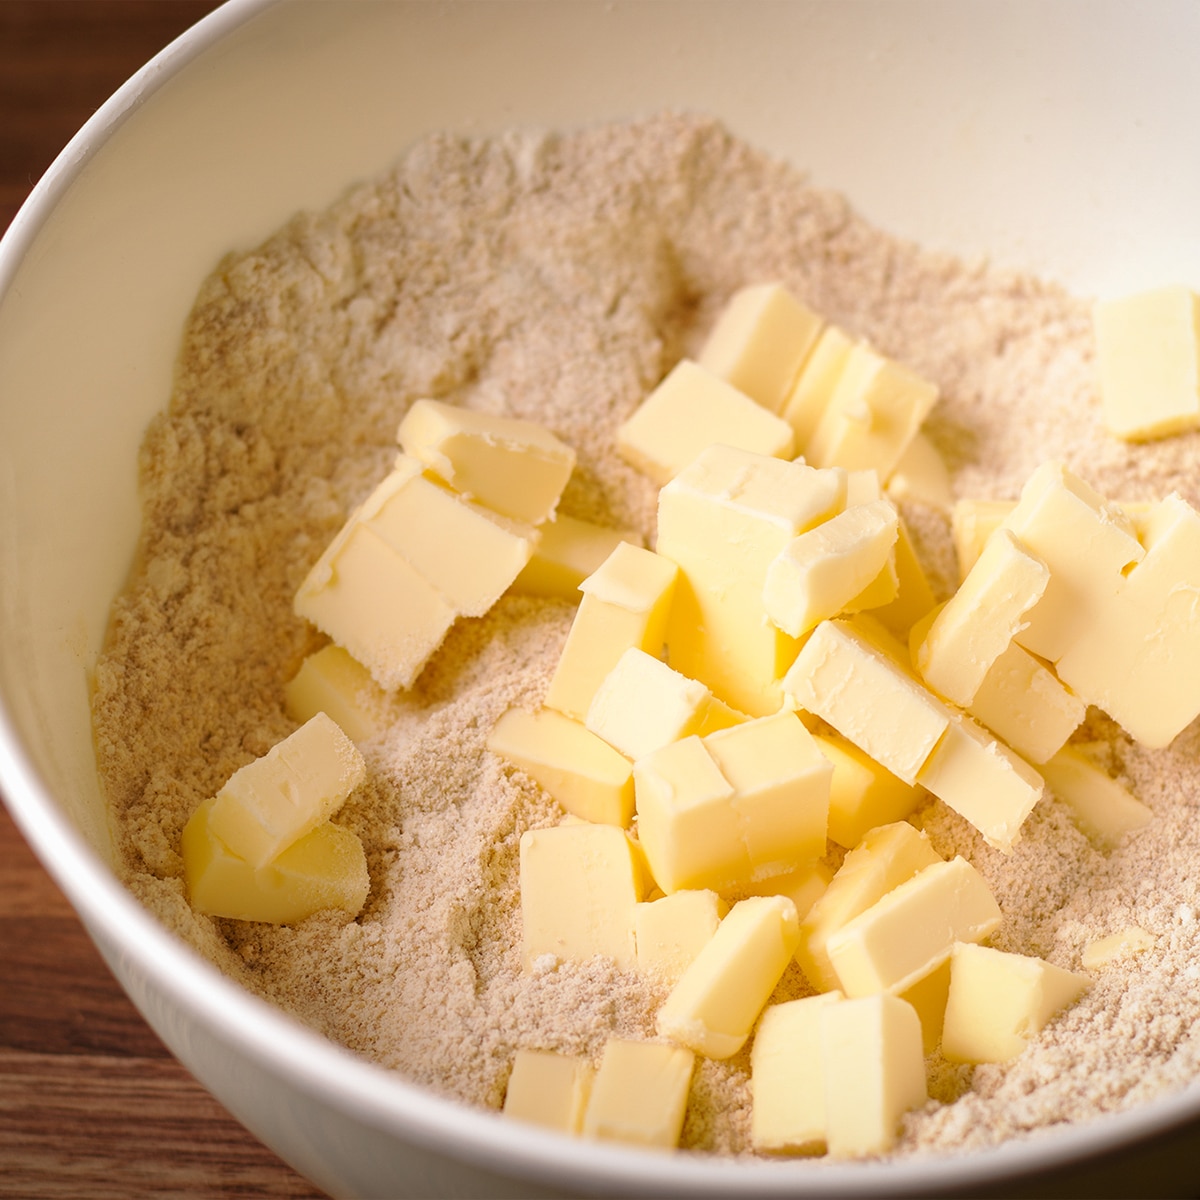 Pieces of cold butter piled on top of flour inside a white mixing bowl.